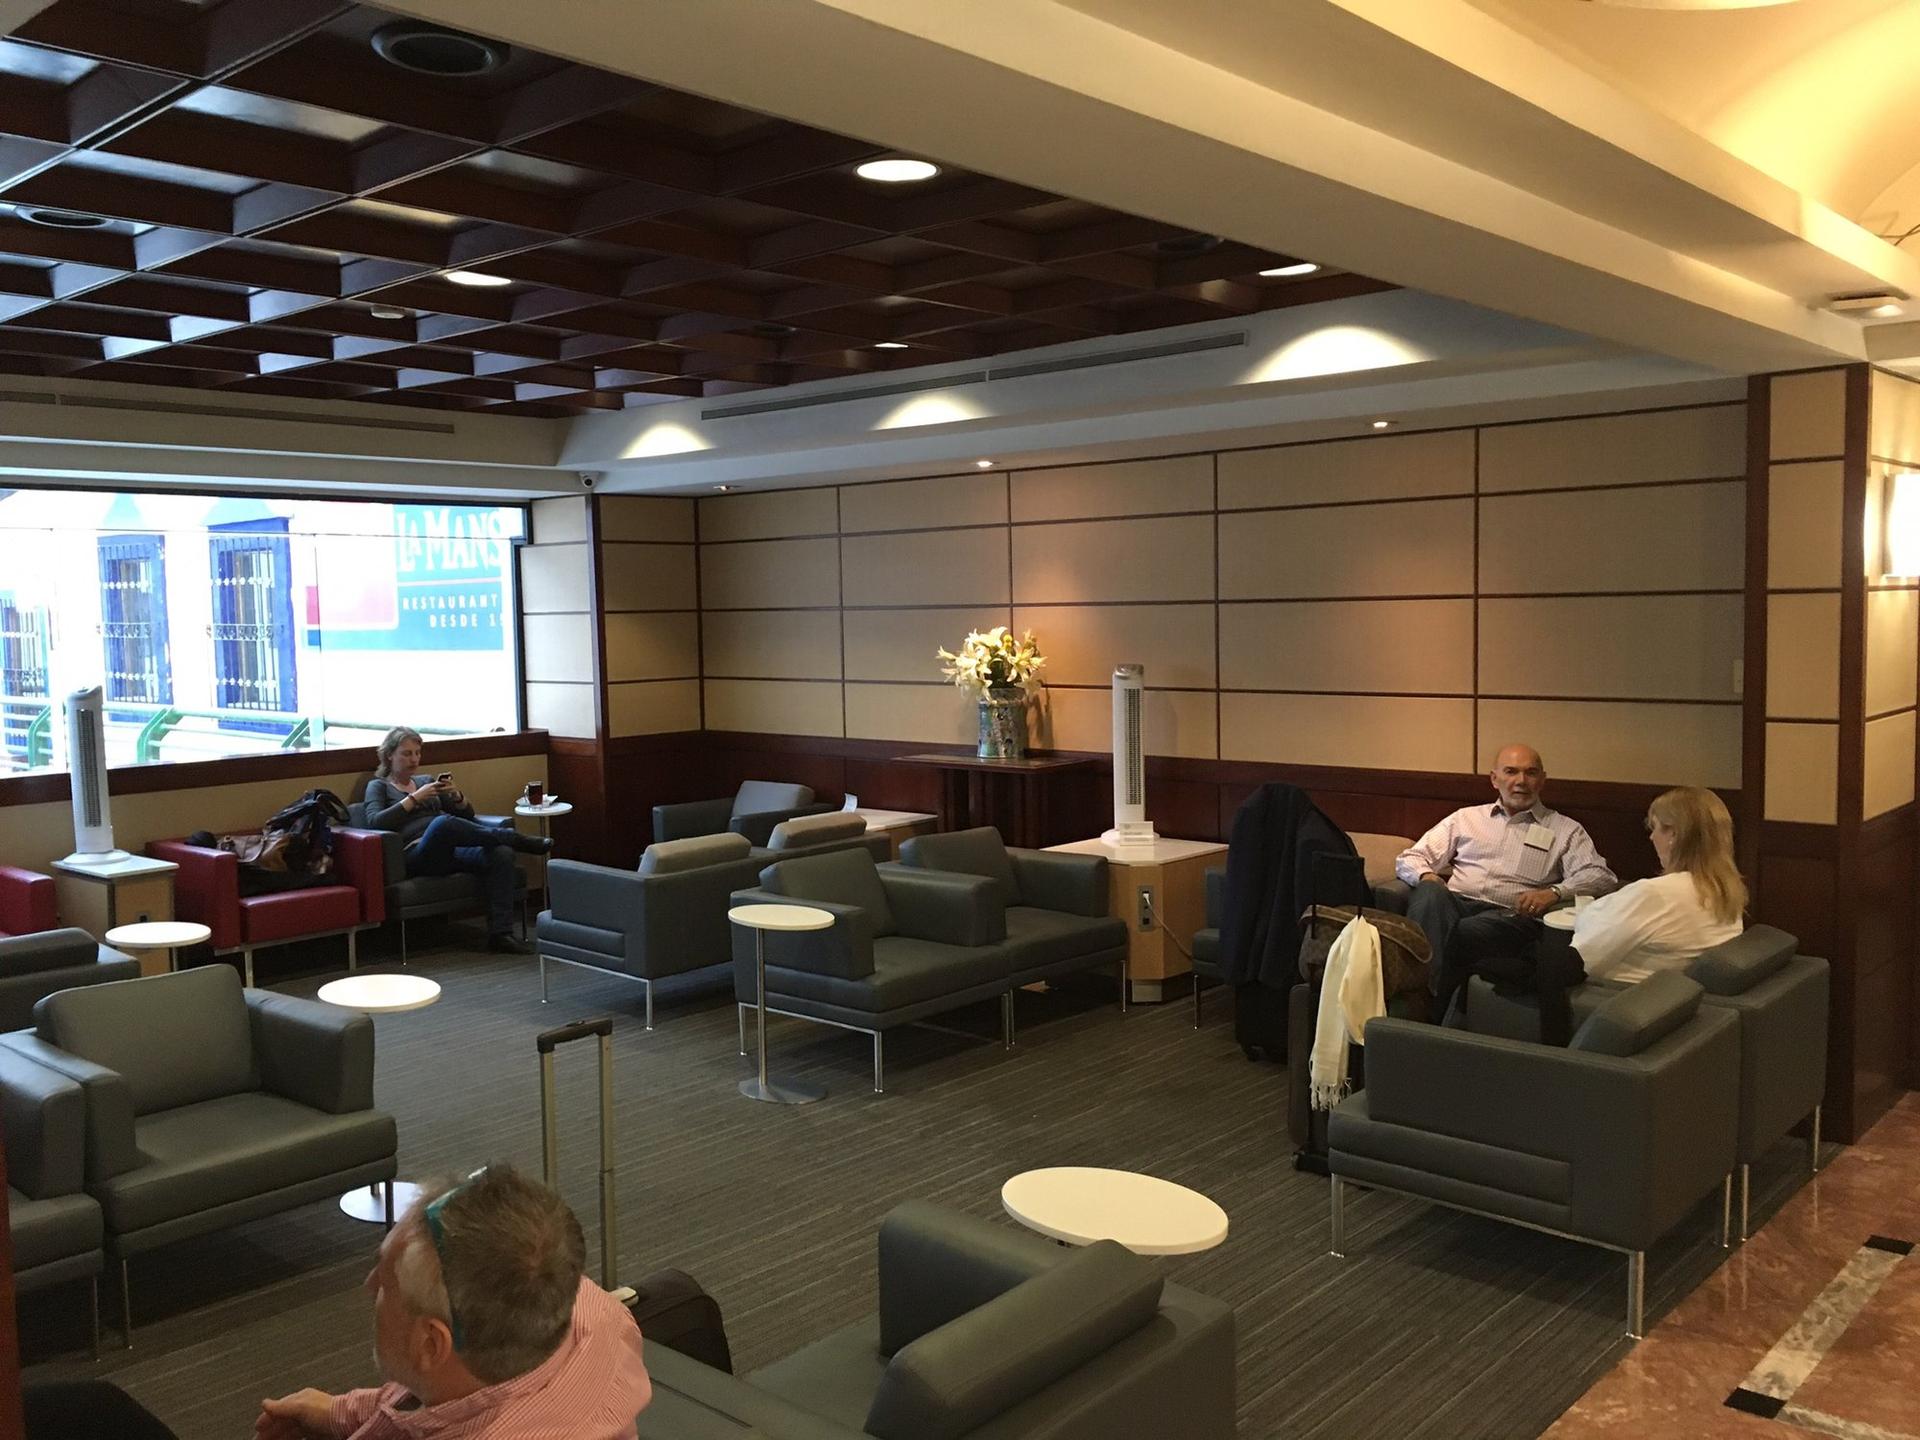 American Airlines Admirals Club image 20 of 32